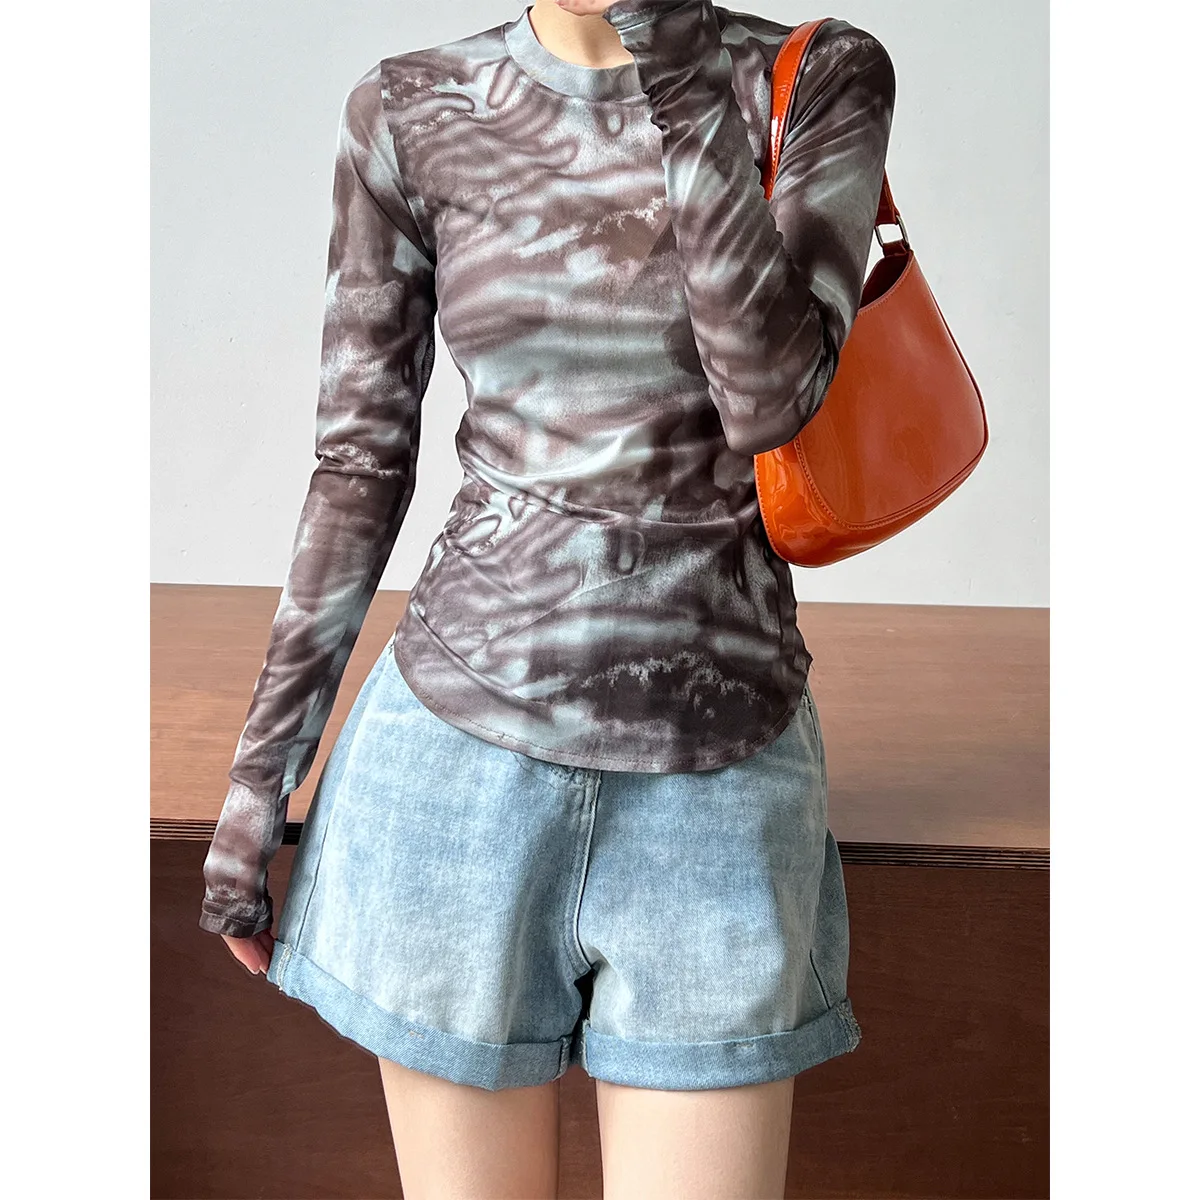 

Tie Dyed Bottom Shirt Perspective T-shirt Women's Slim Fit Pure Desire Spicy Girl Short Long Sleeve Mesh Sunscreen Top